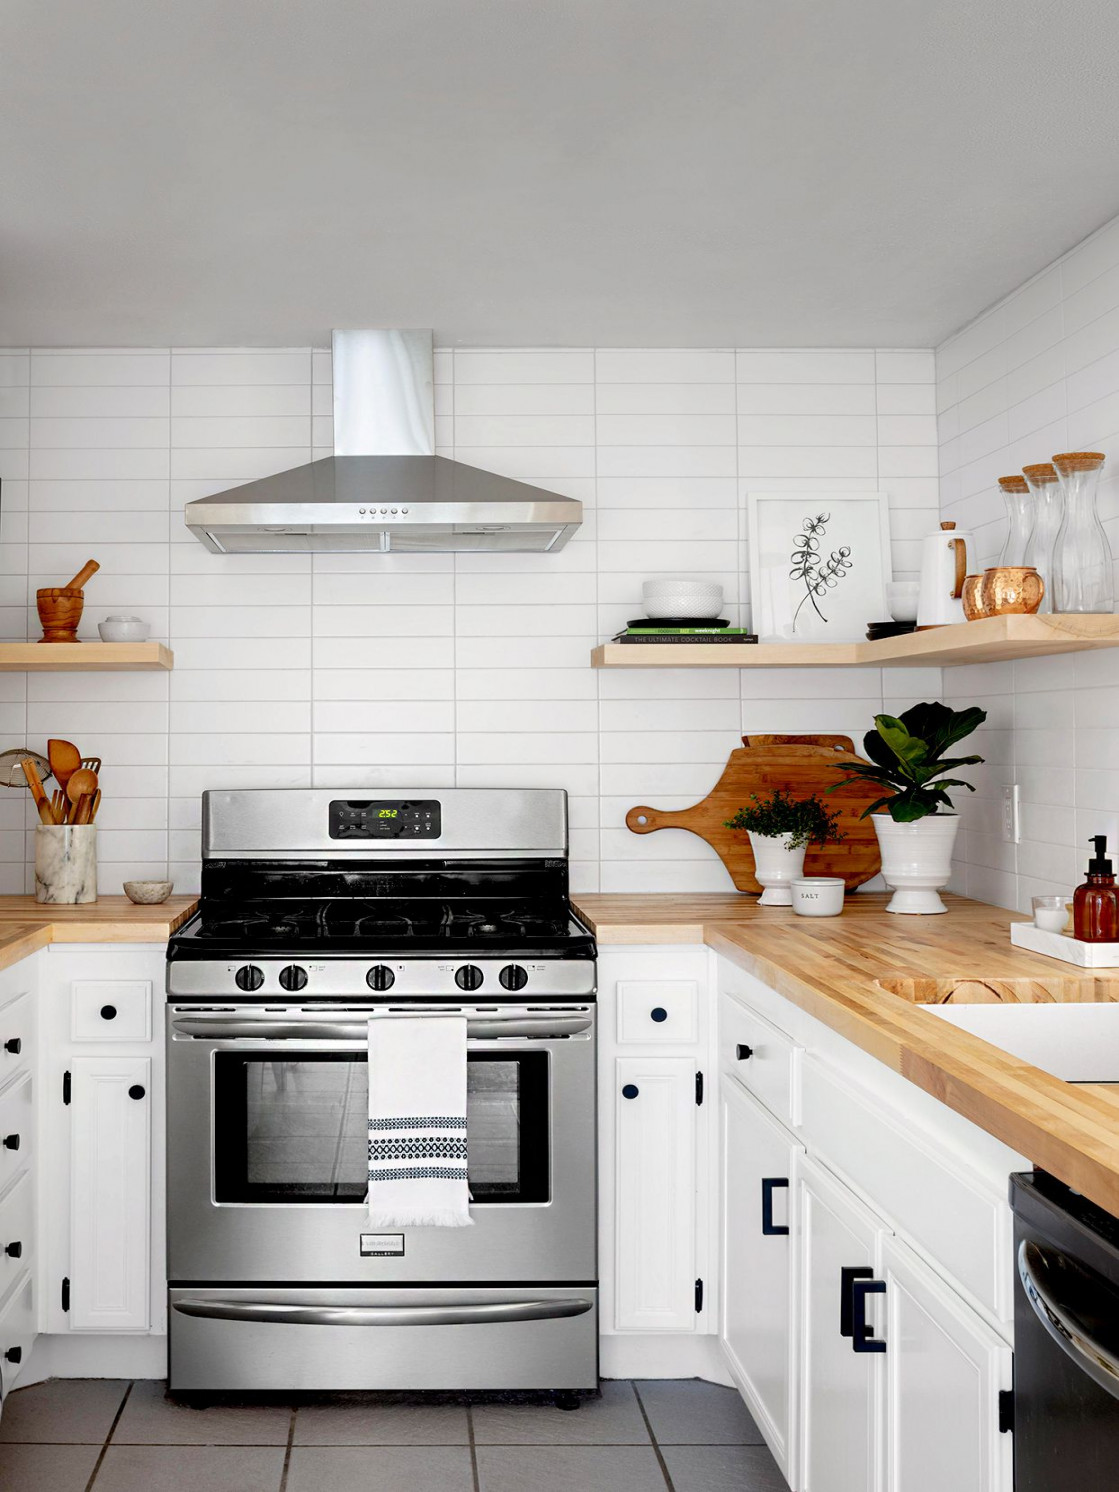 Stylish Ideas for Remodeling a Kitchen on a Budget